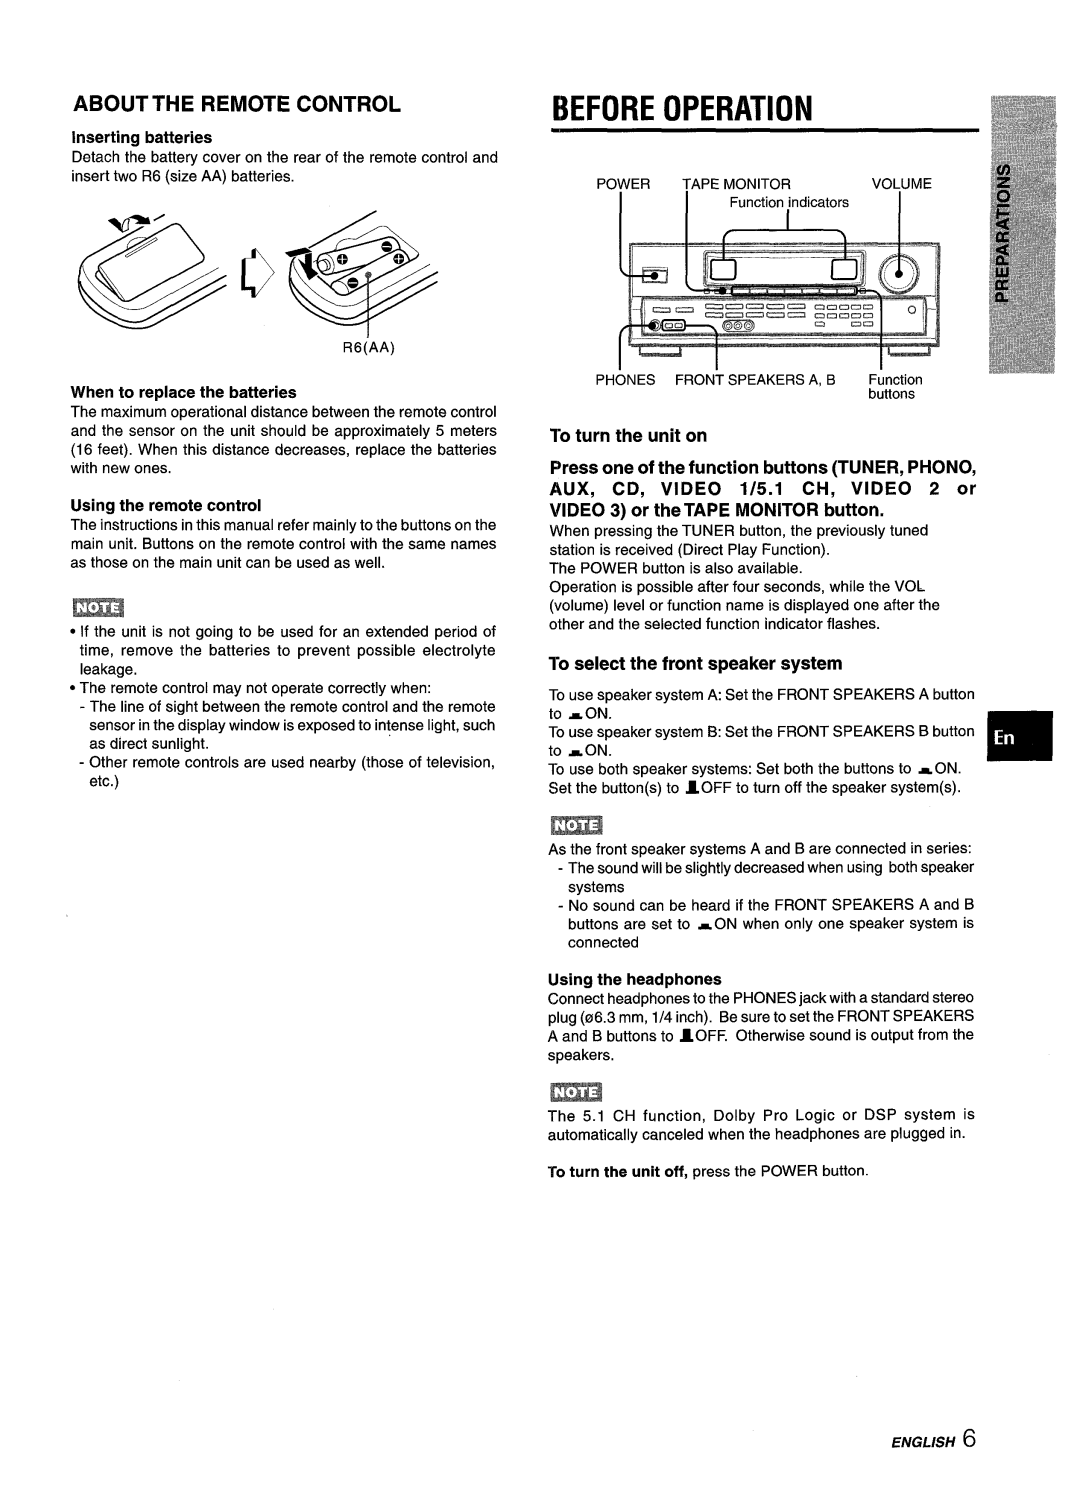 Aiwa AV-D25 manual Operation, Before, Abouttheremote Control, Using the remote control, To select the front speaker system 